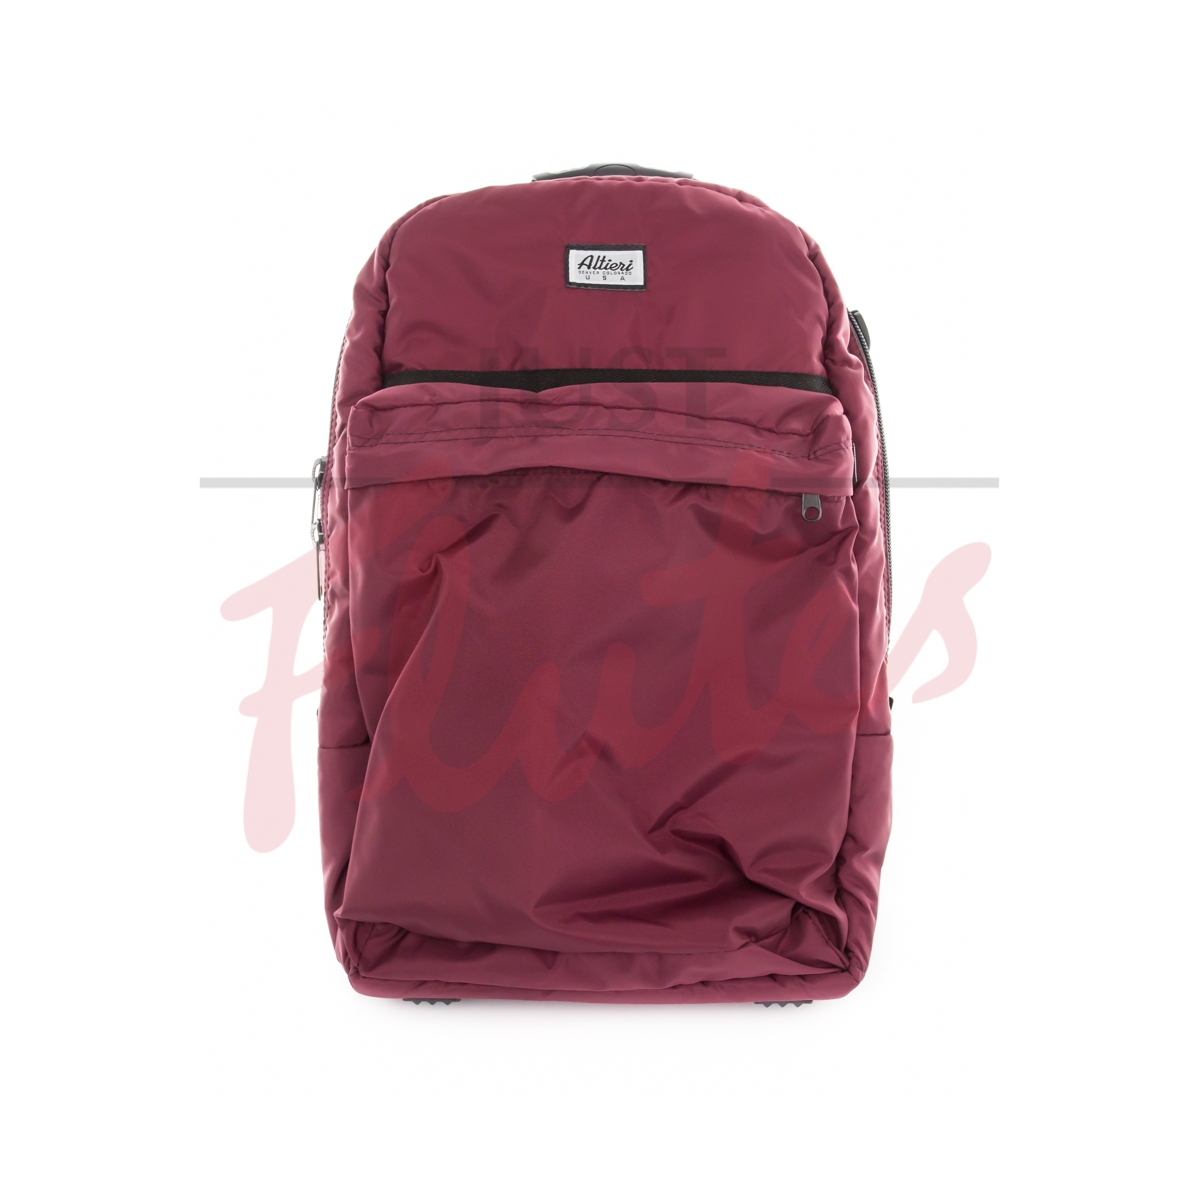 Altieri AFBP-00-BU Backpack for Flute, Alto, Piccolo and Laptop - Burgundy